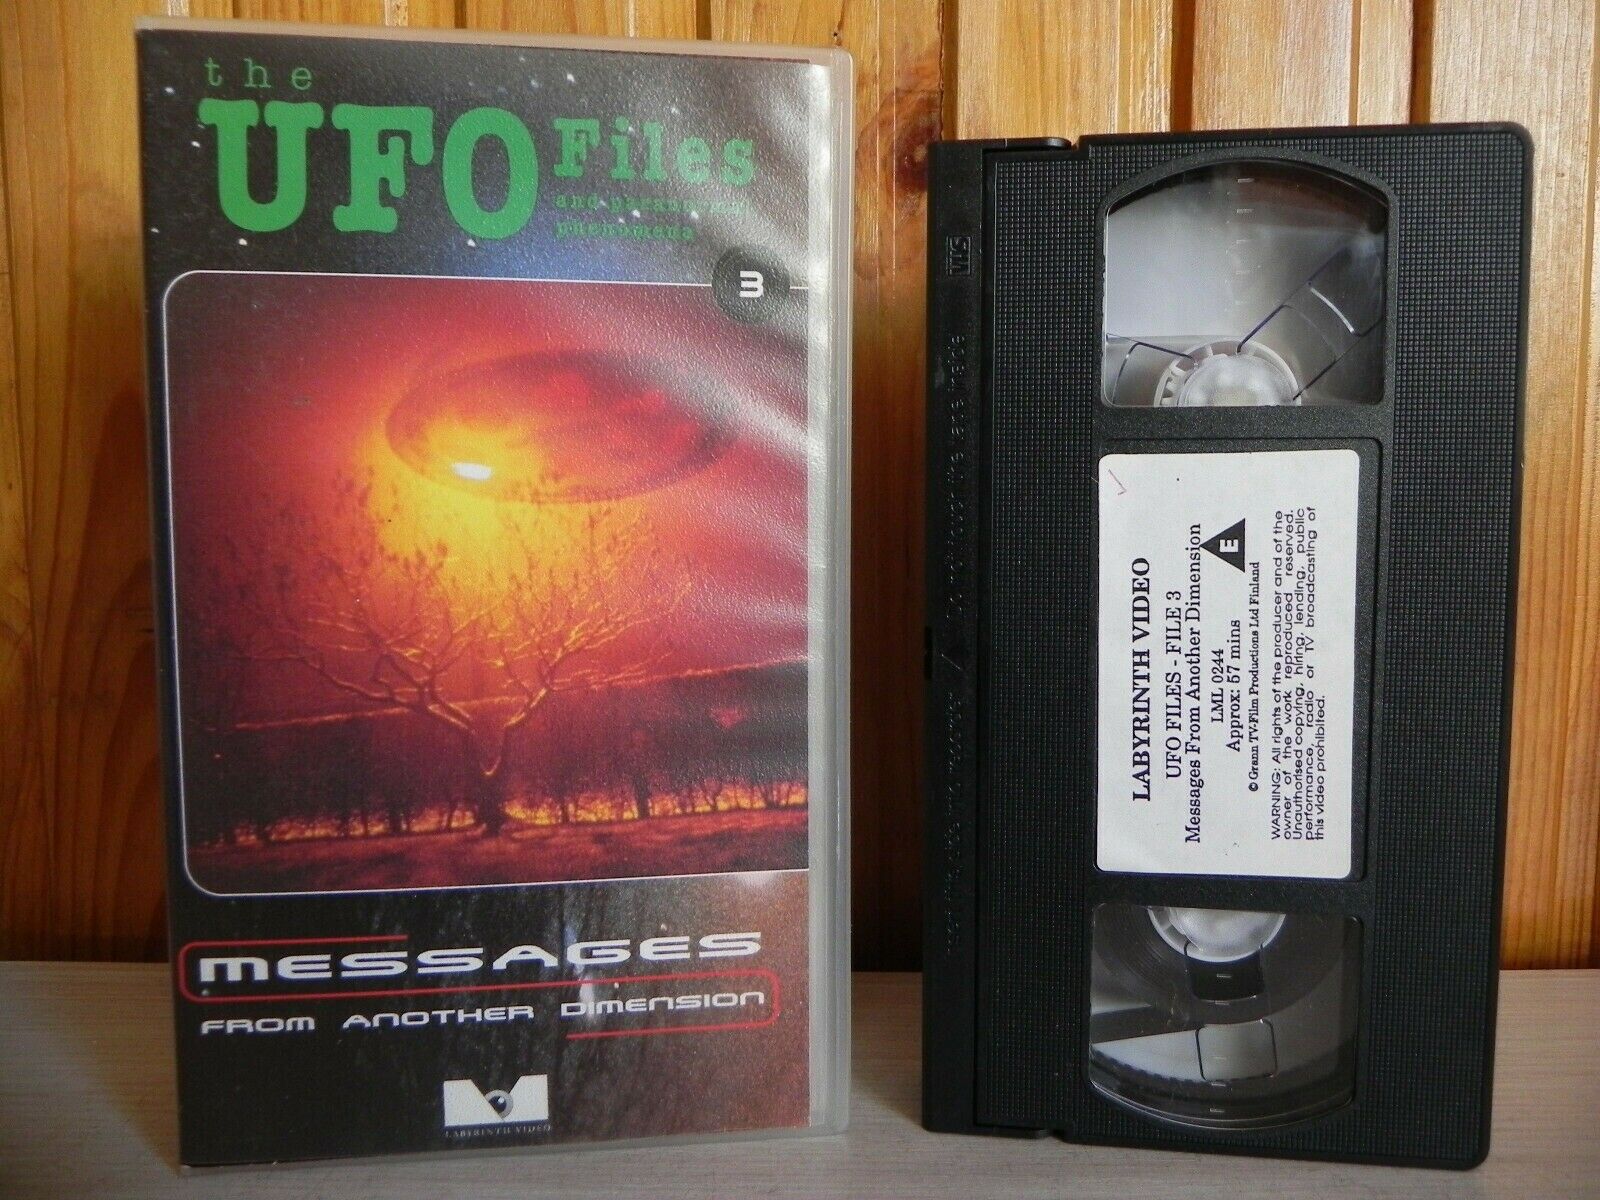 The UFO Files - Paranormal Phenomena - Messages From Another Dimension - VHS-